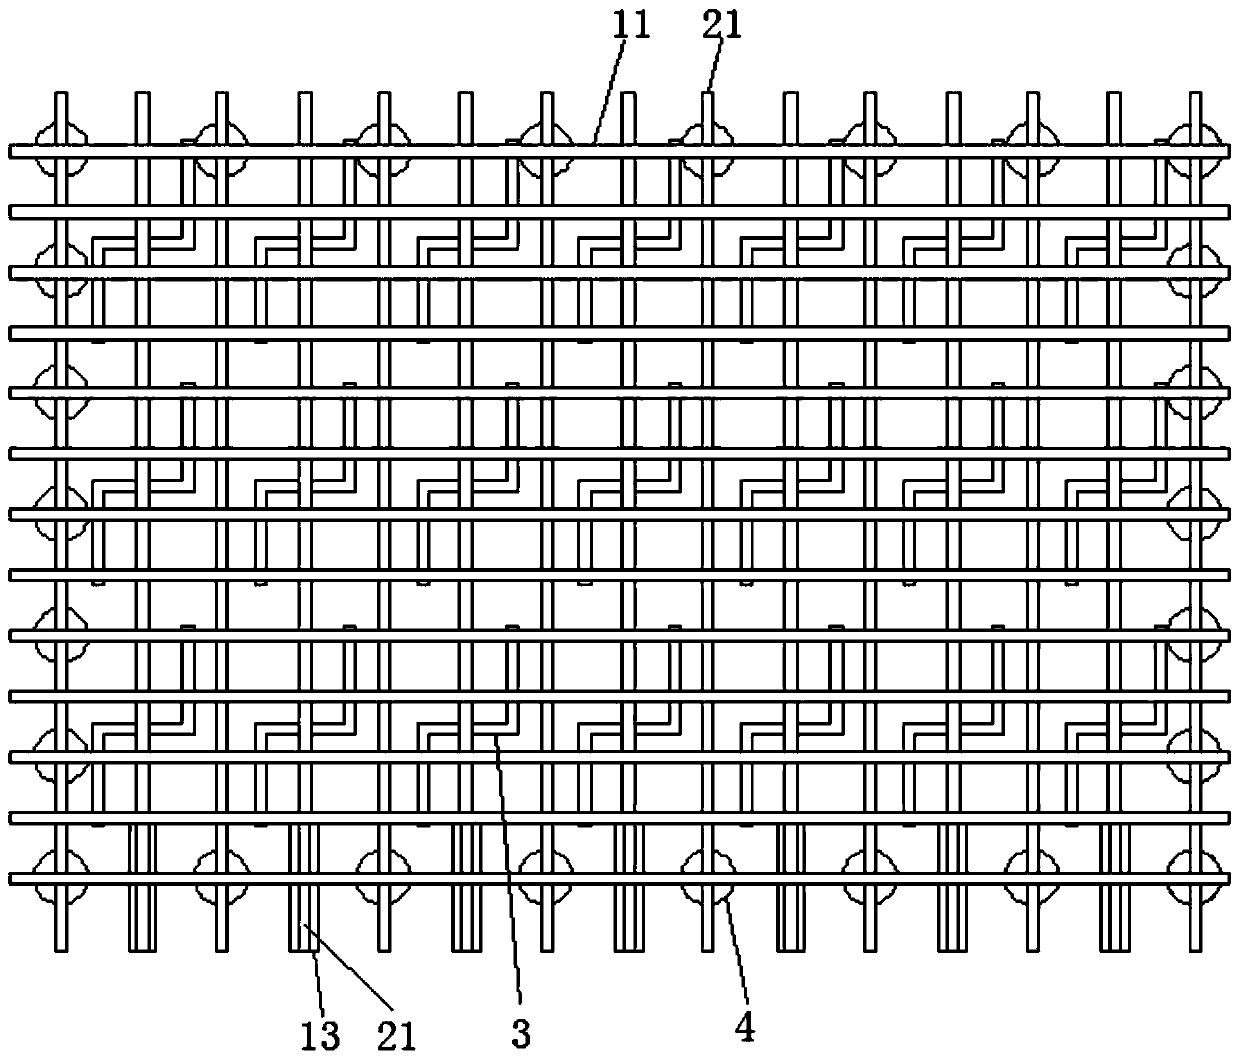 Semi-formed reinforcement cage overall die inlet structure